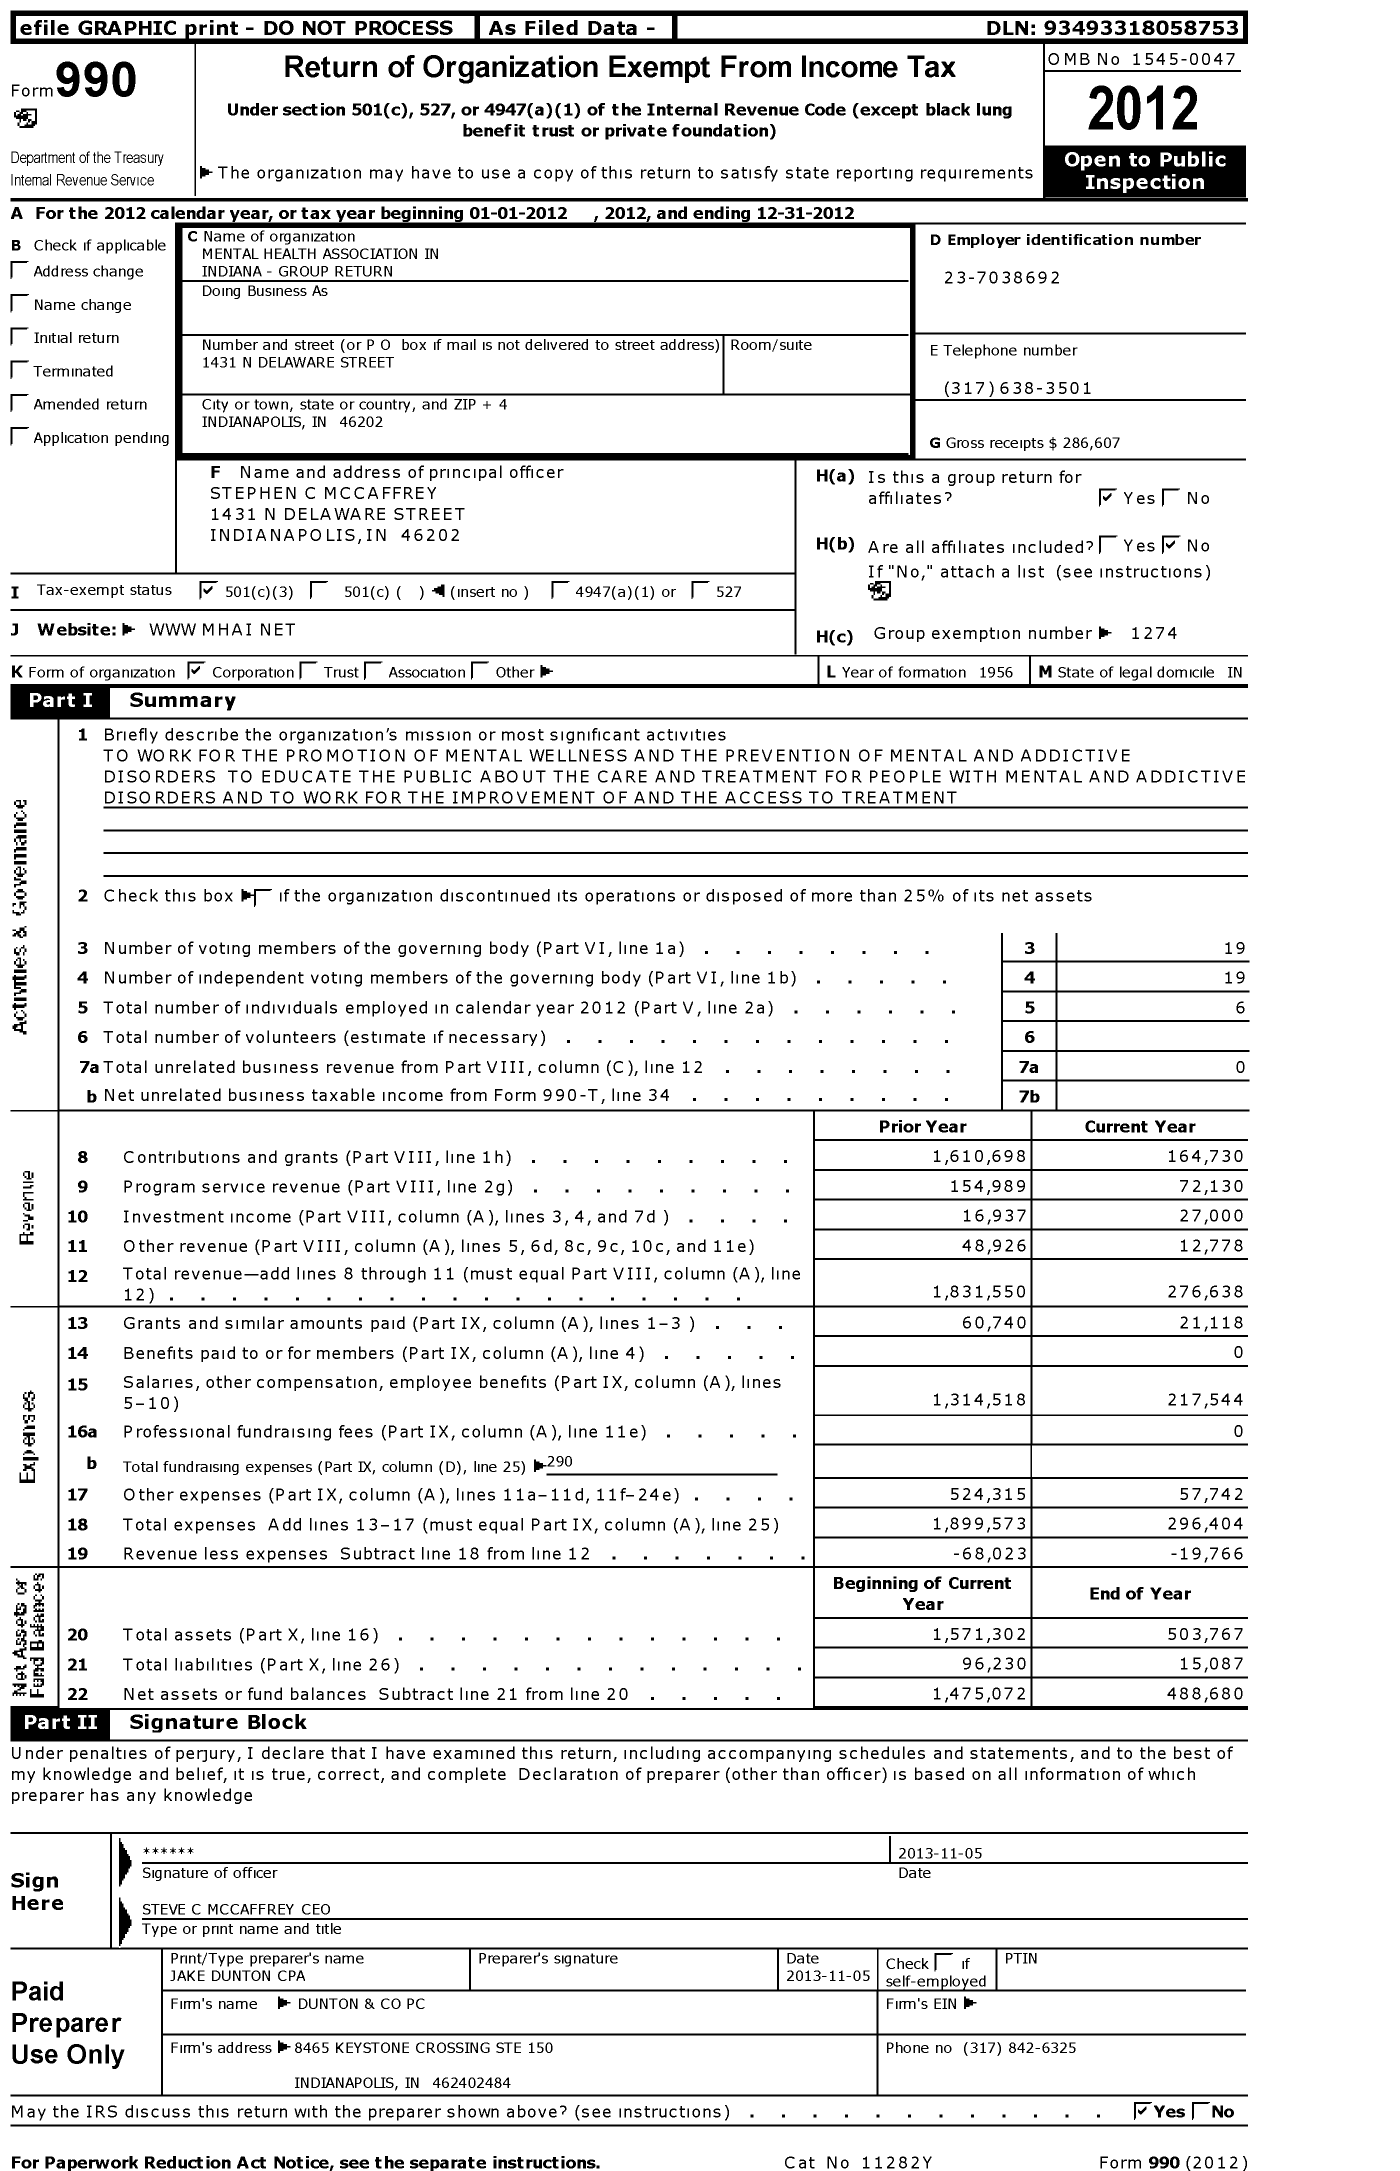 Image of first page of 2012 Form 990 for Mental Health Association in Indiana Group Return